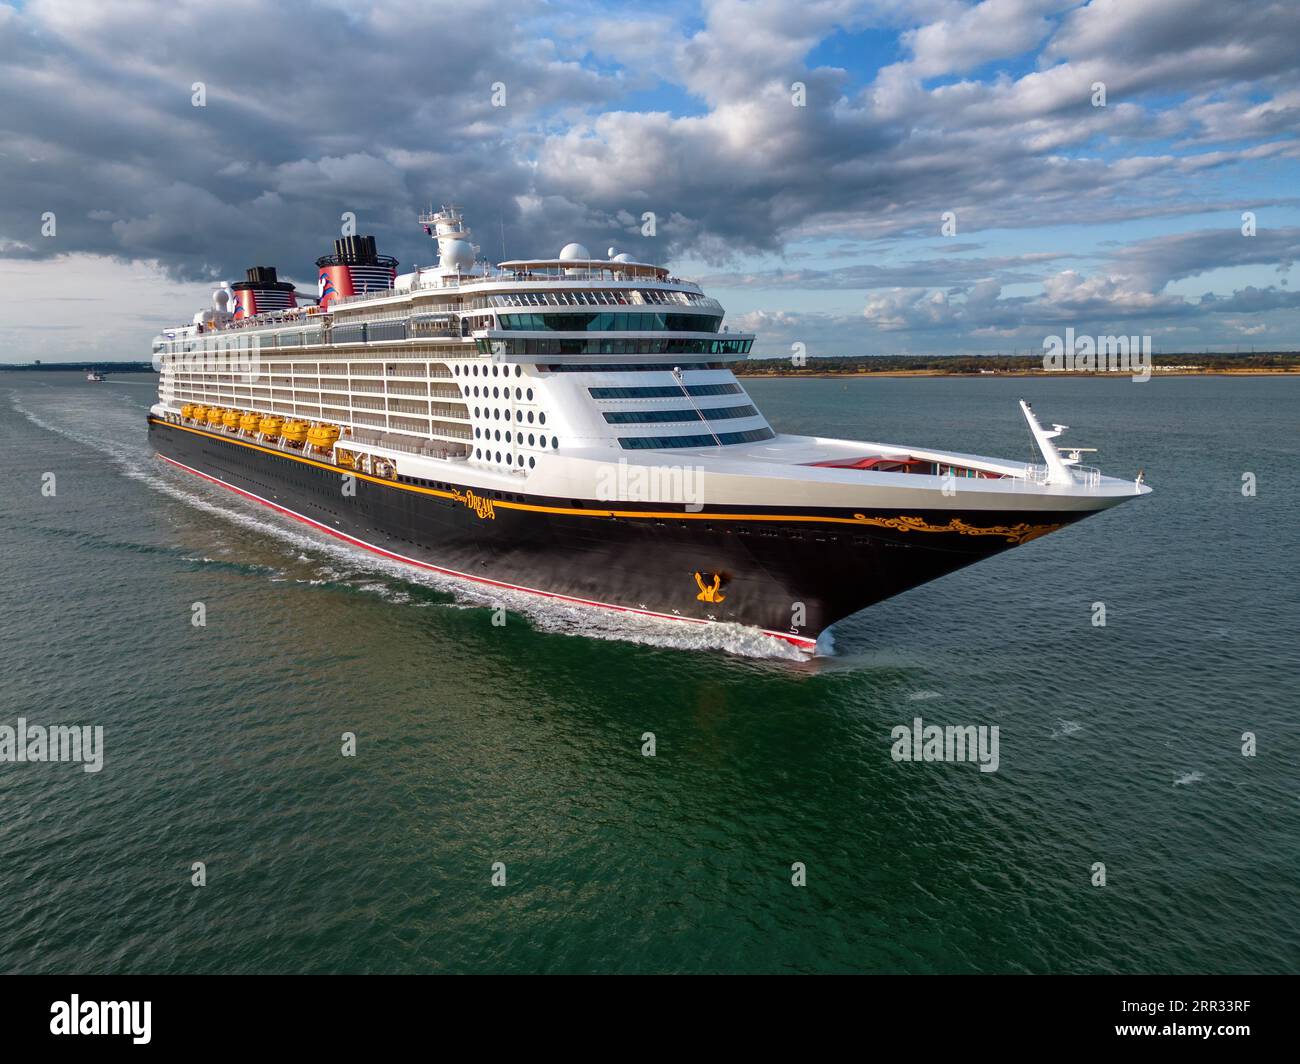 Disney Dream is a cruise ship operated by the Disney Cruise Line, part of the Walt Disney Company. Stock Photo